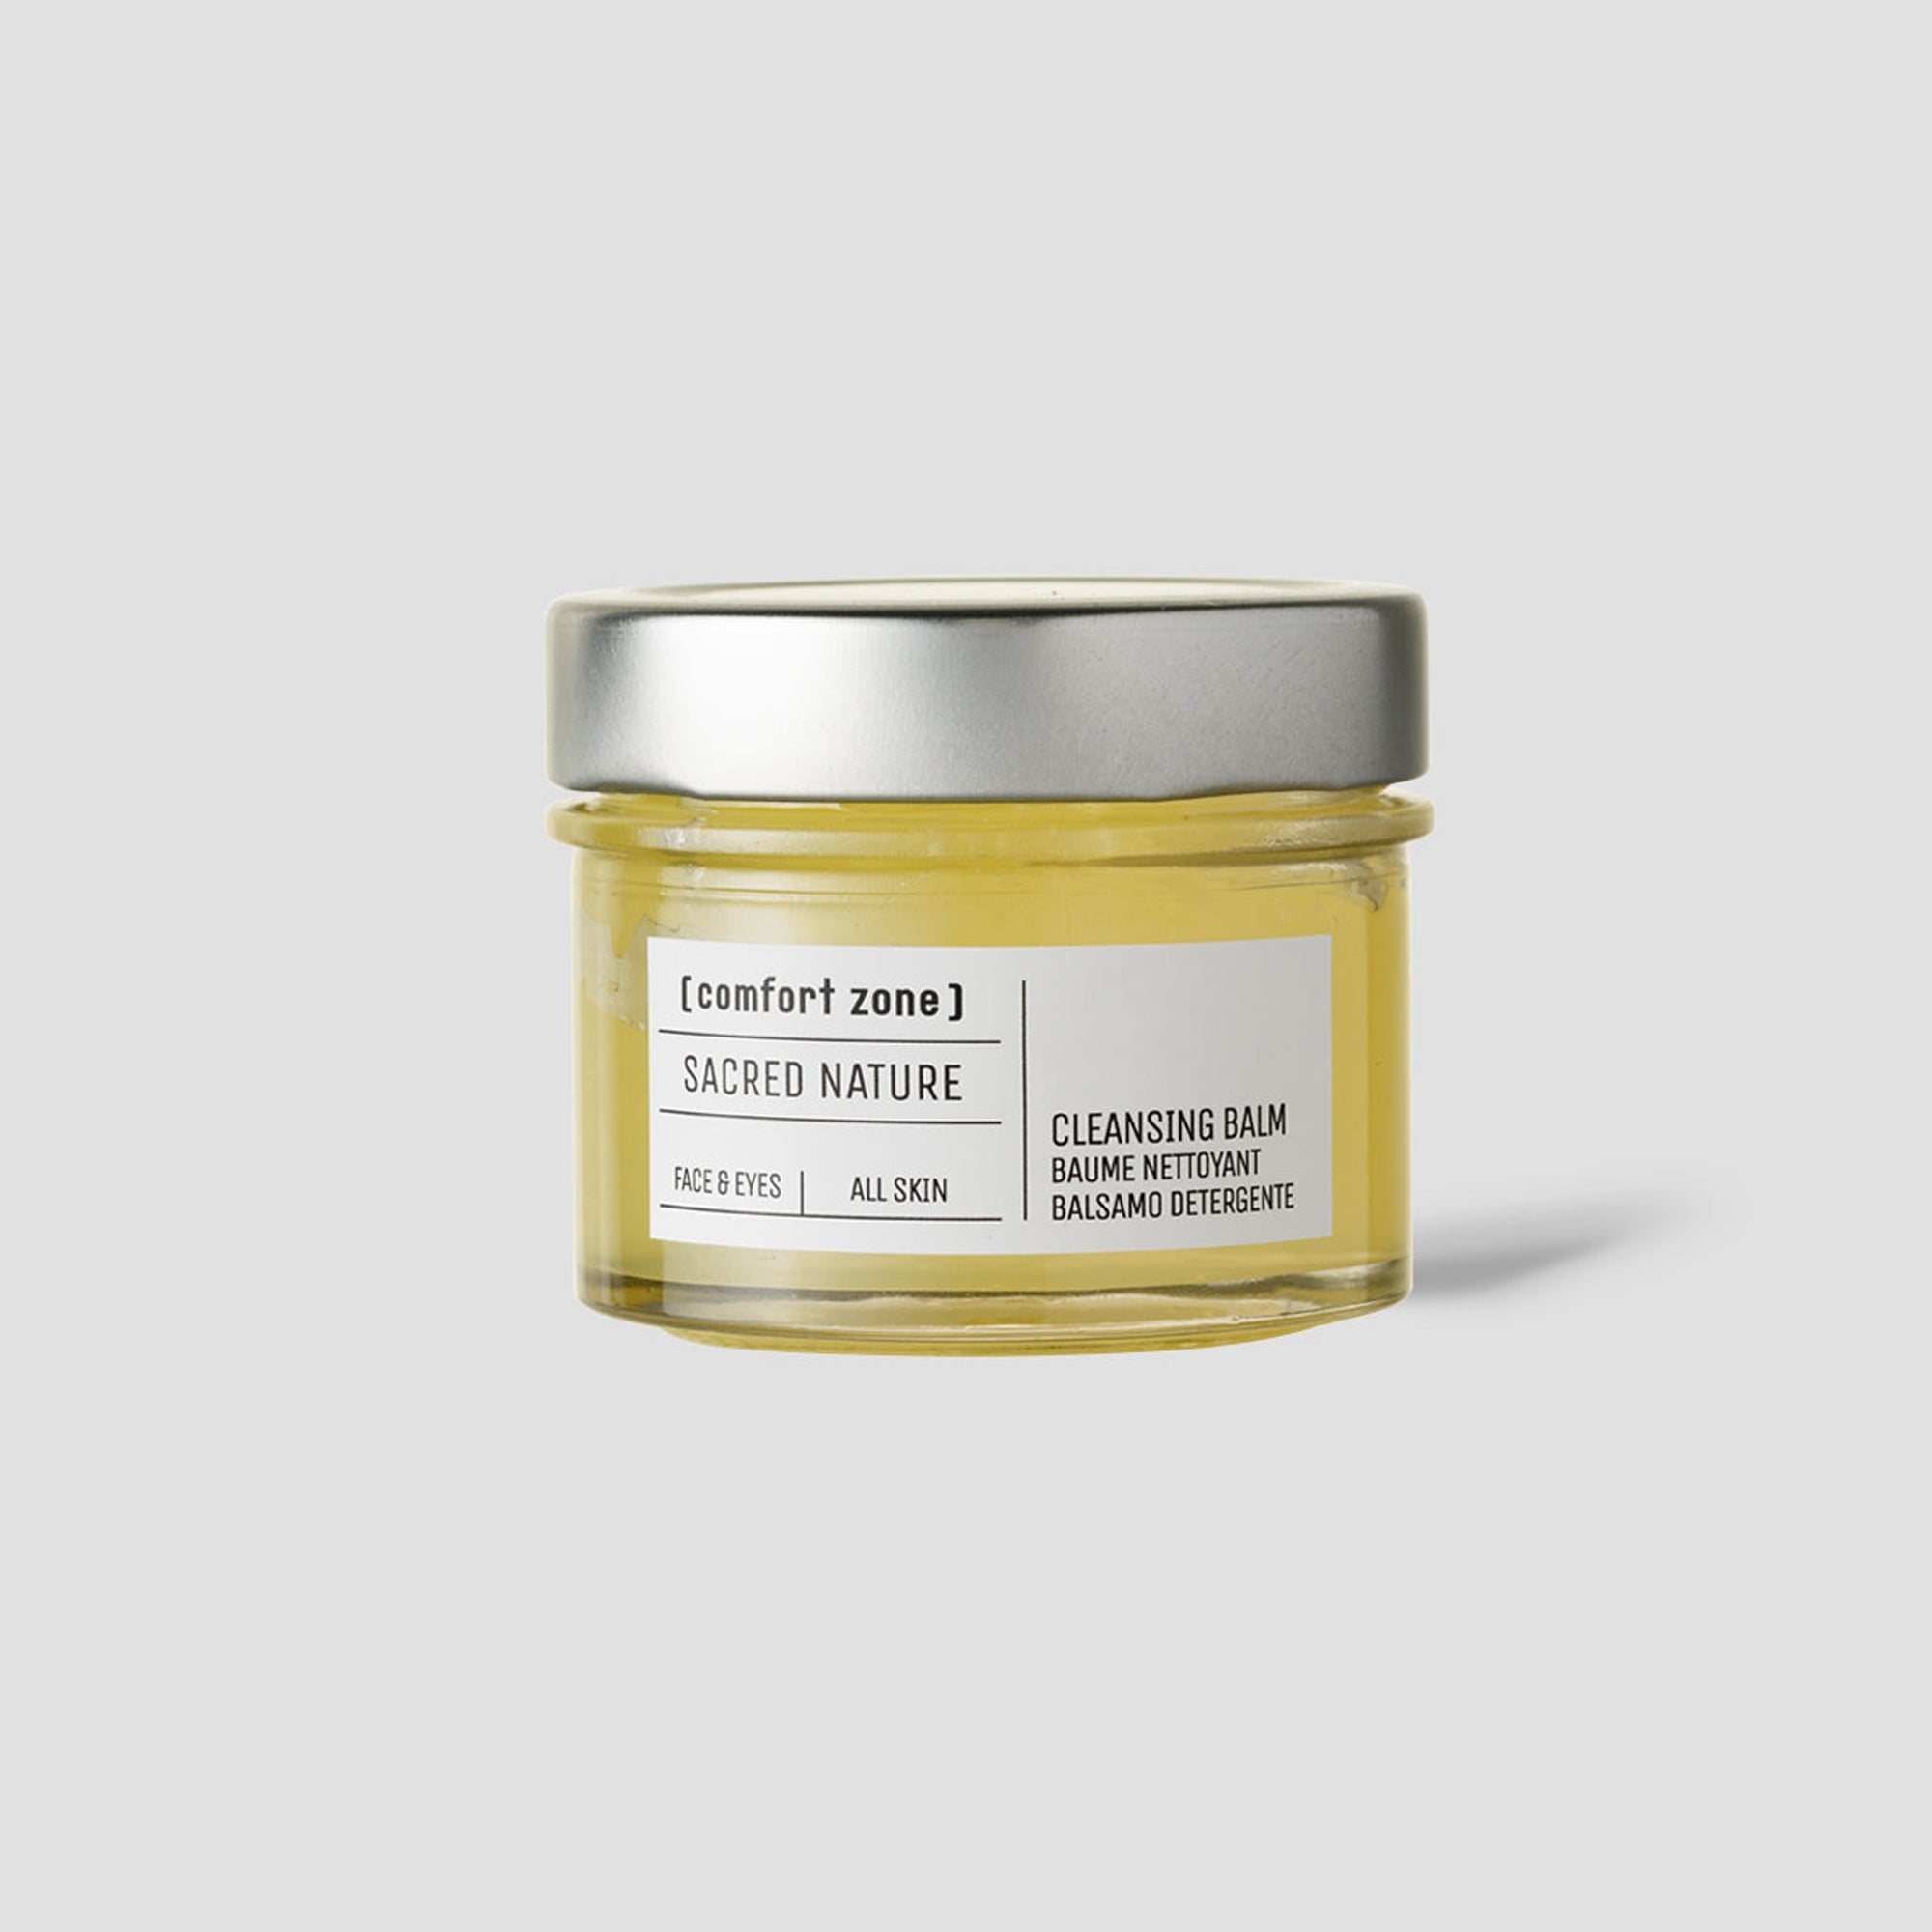 Sacred Nature Cleansing Balm (Gentle Cleansing Balm) - 110ml - [ comfort zone ]